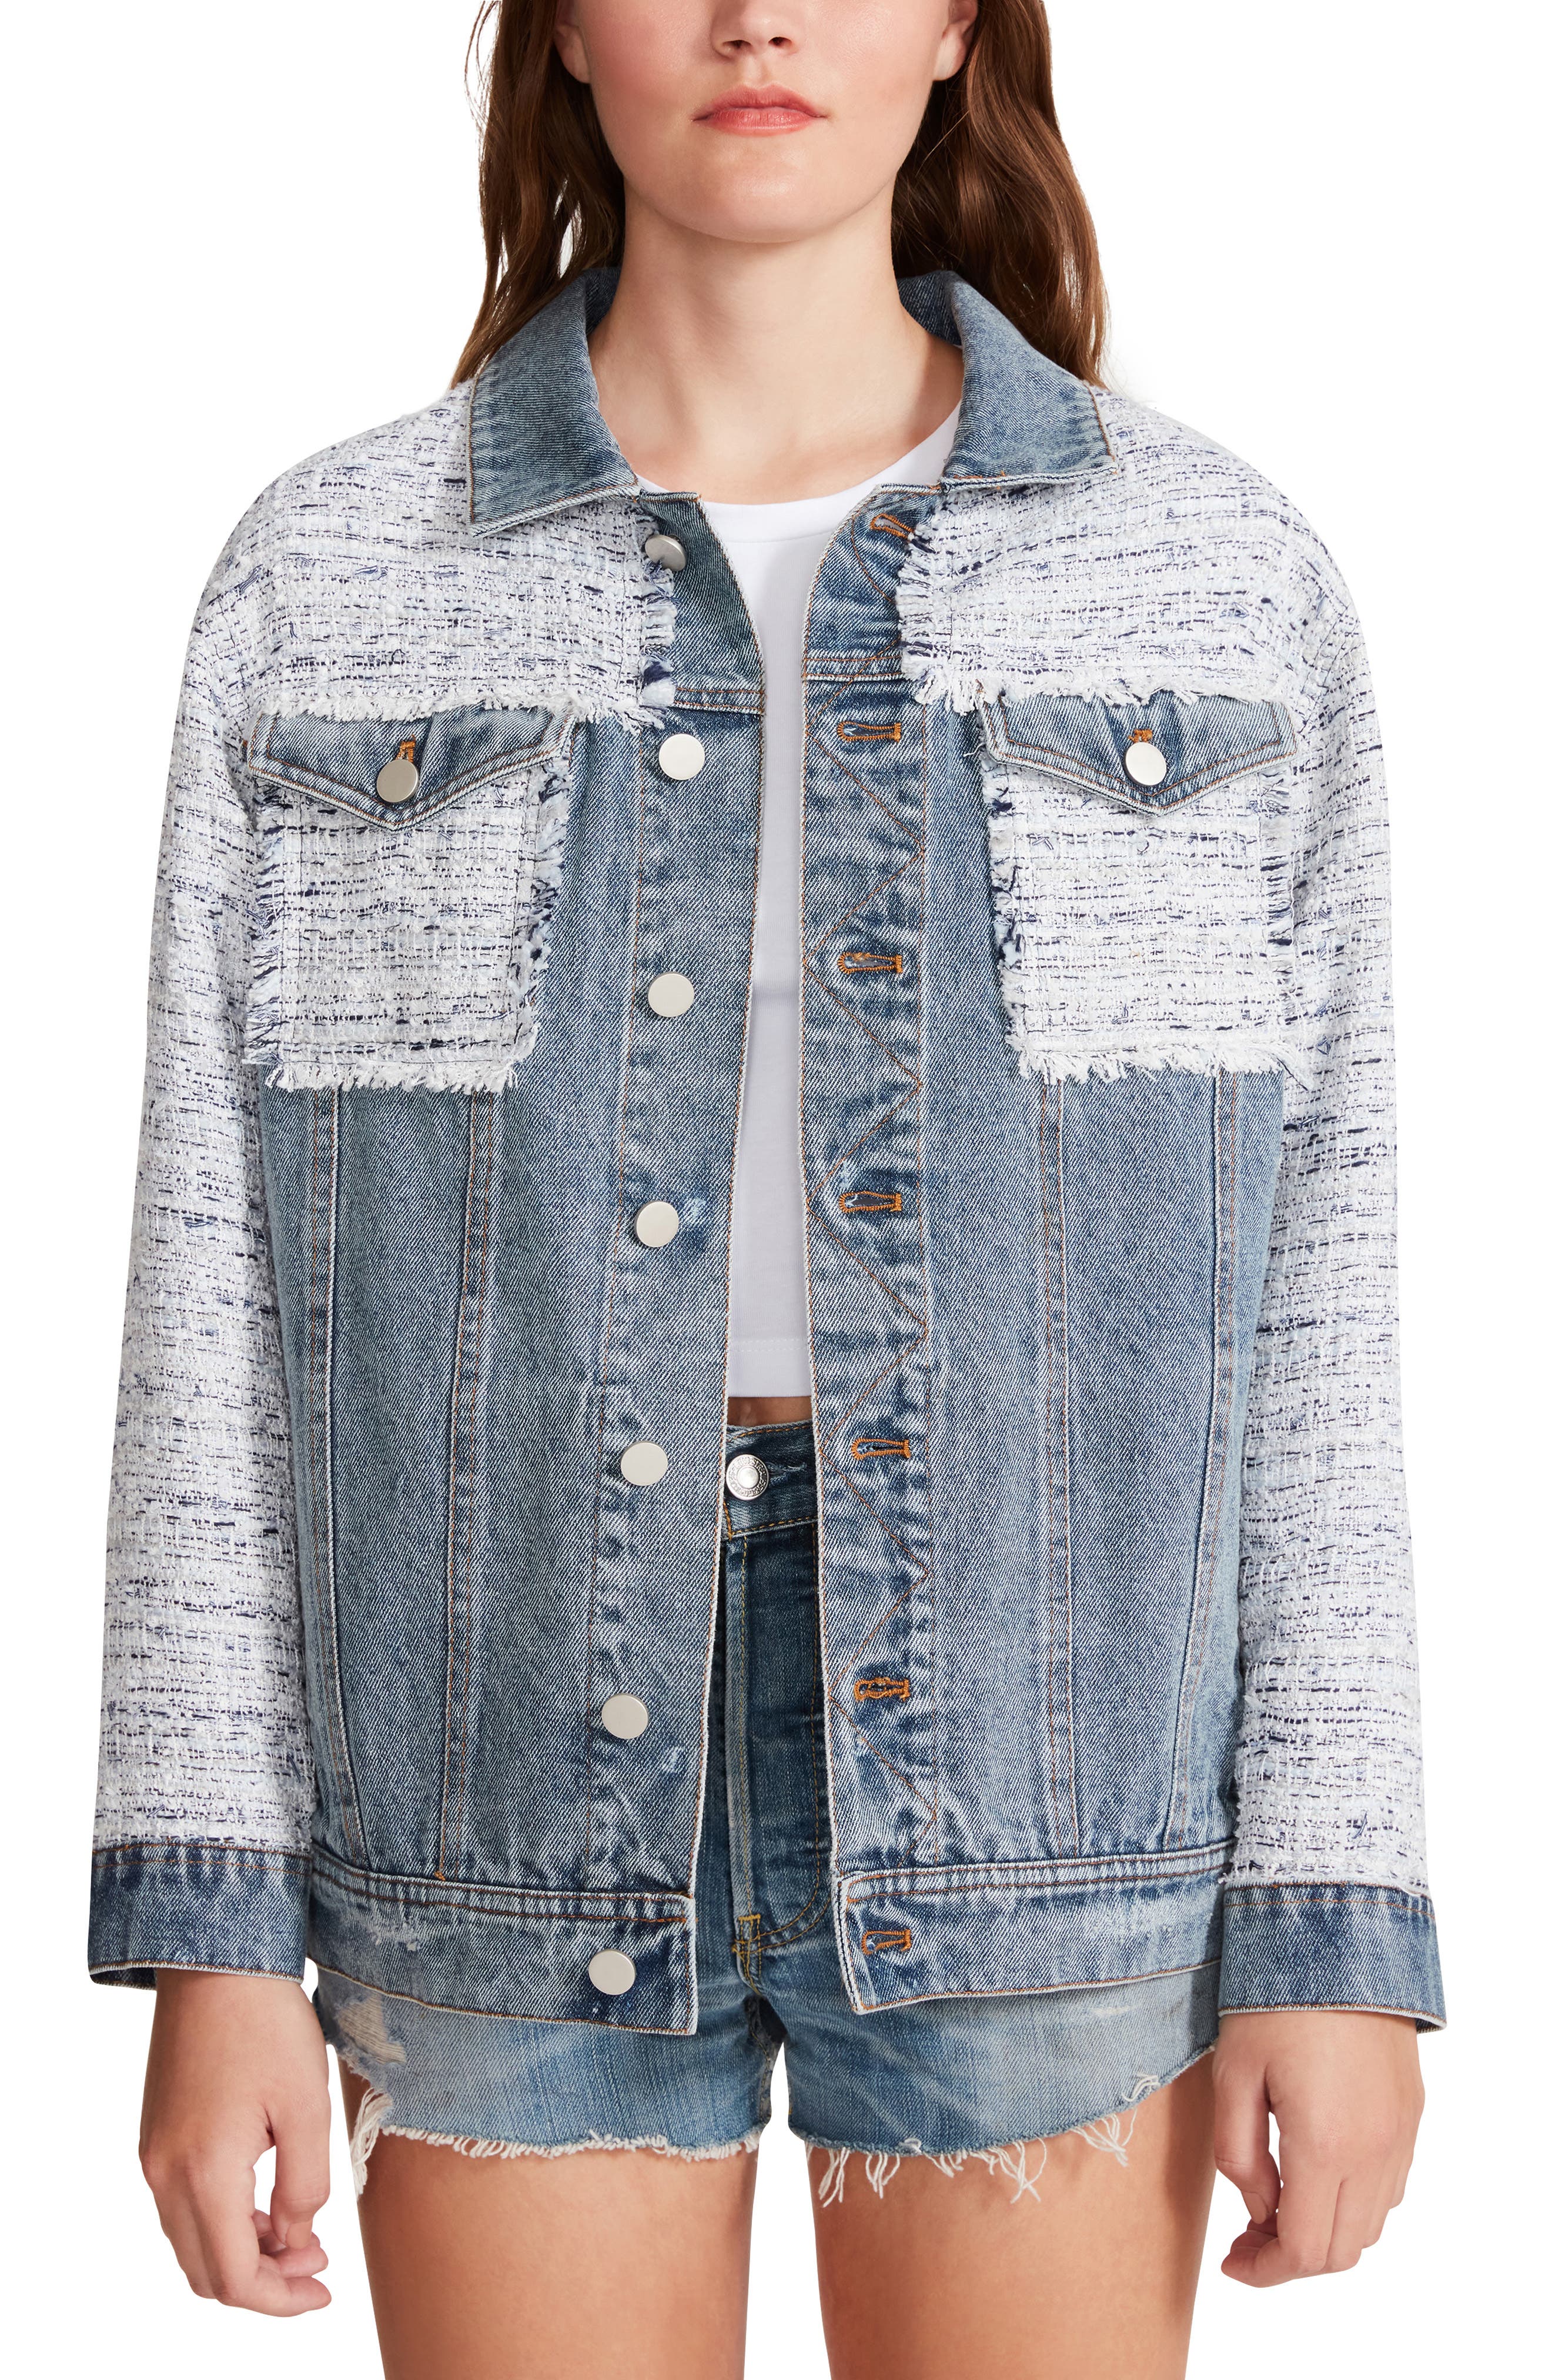 FREE PEOPLE NEW Women's Insulated Printed Patched Denim Jacket Top L TEDO 